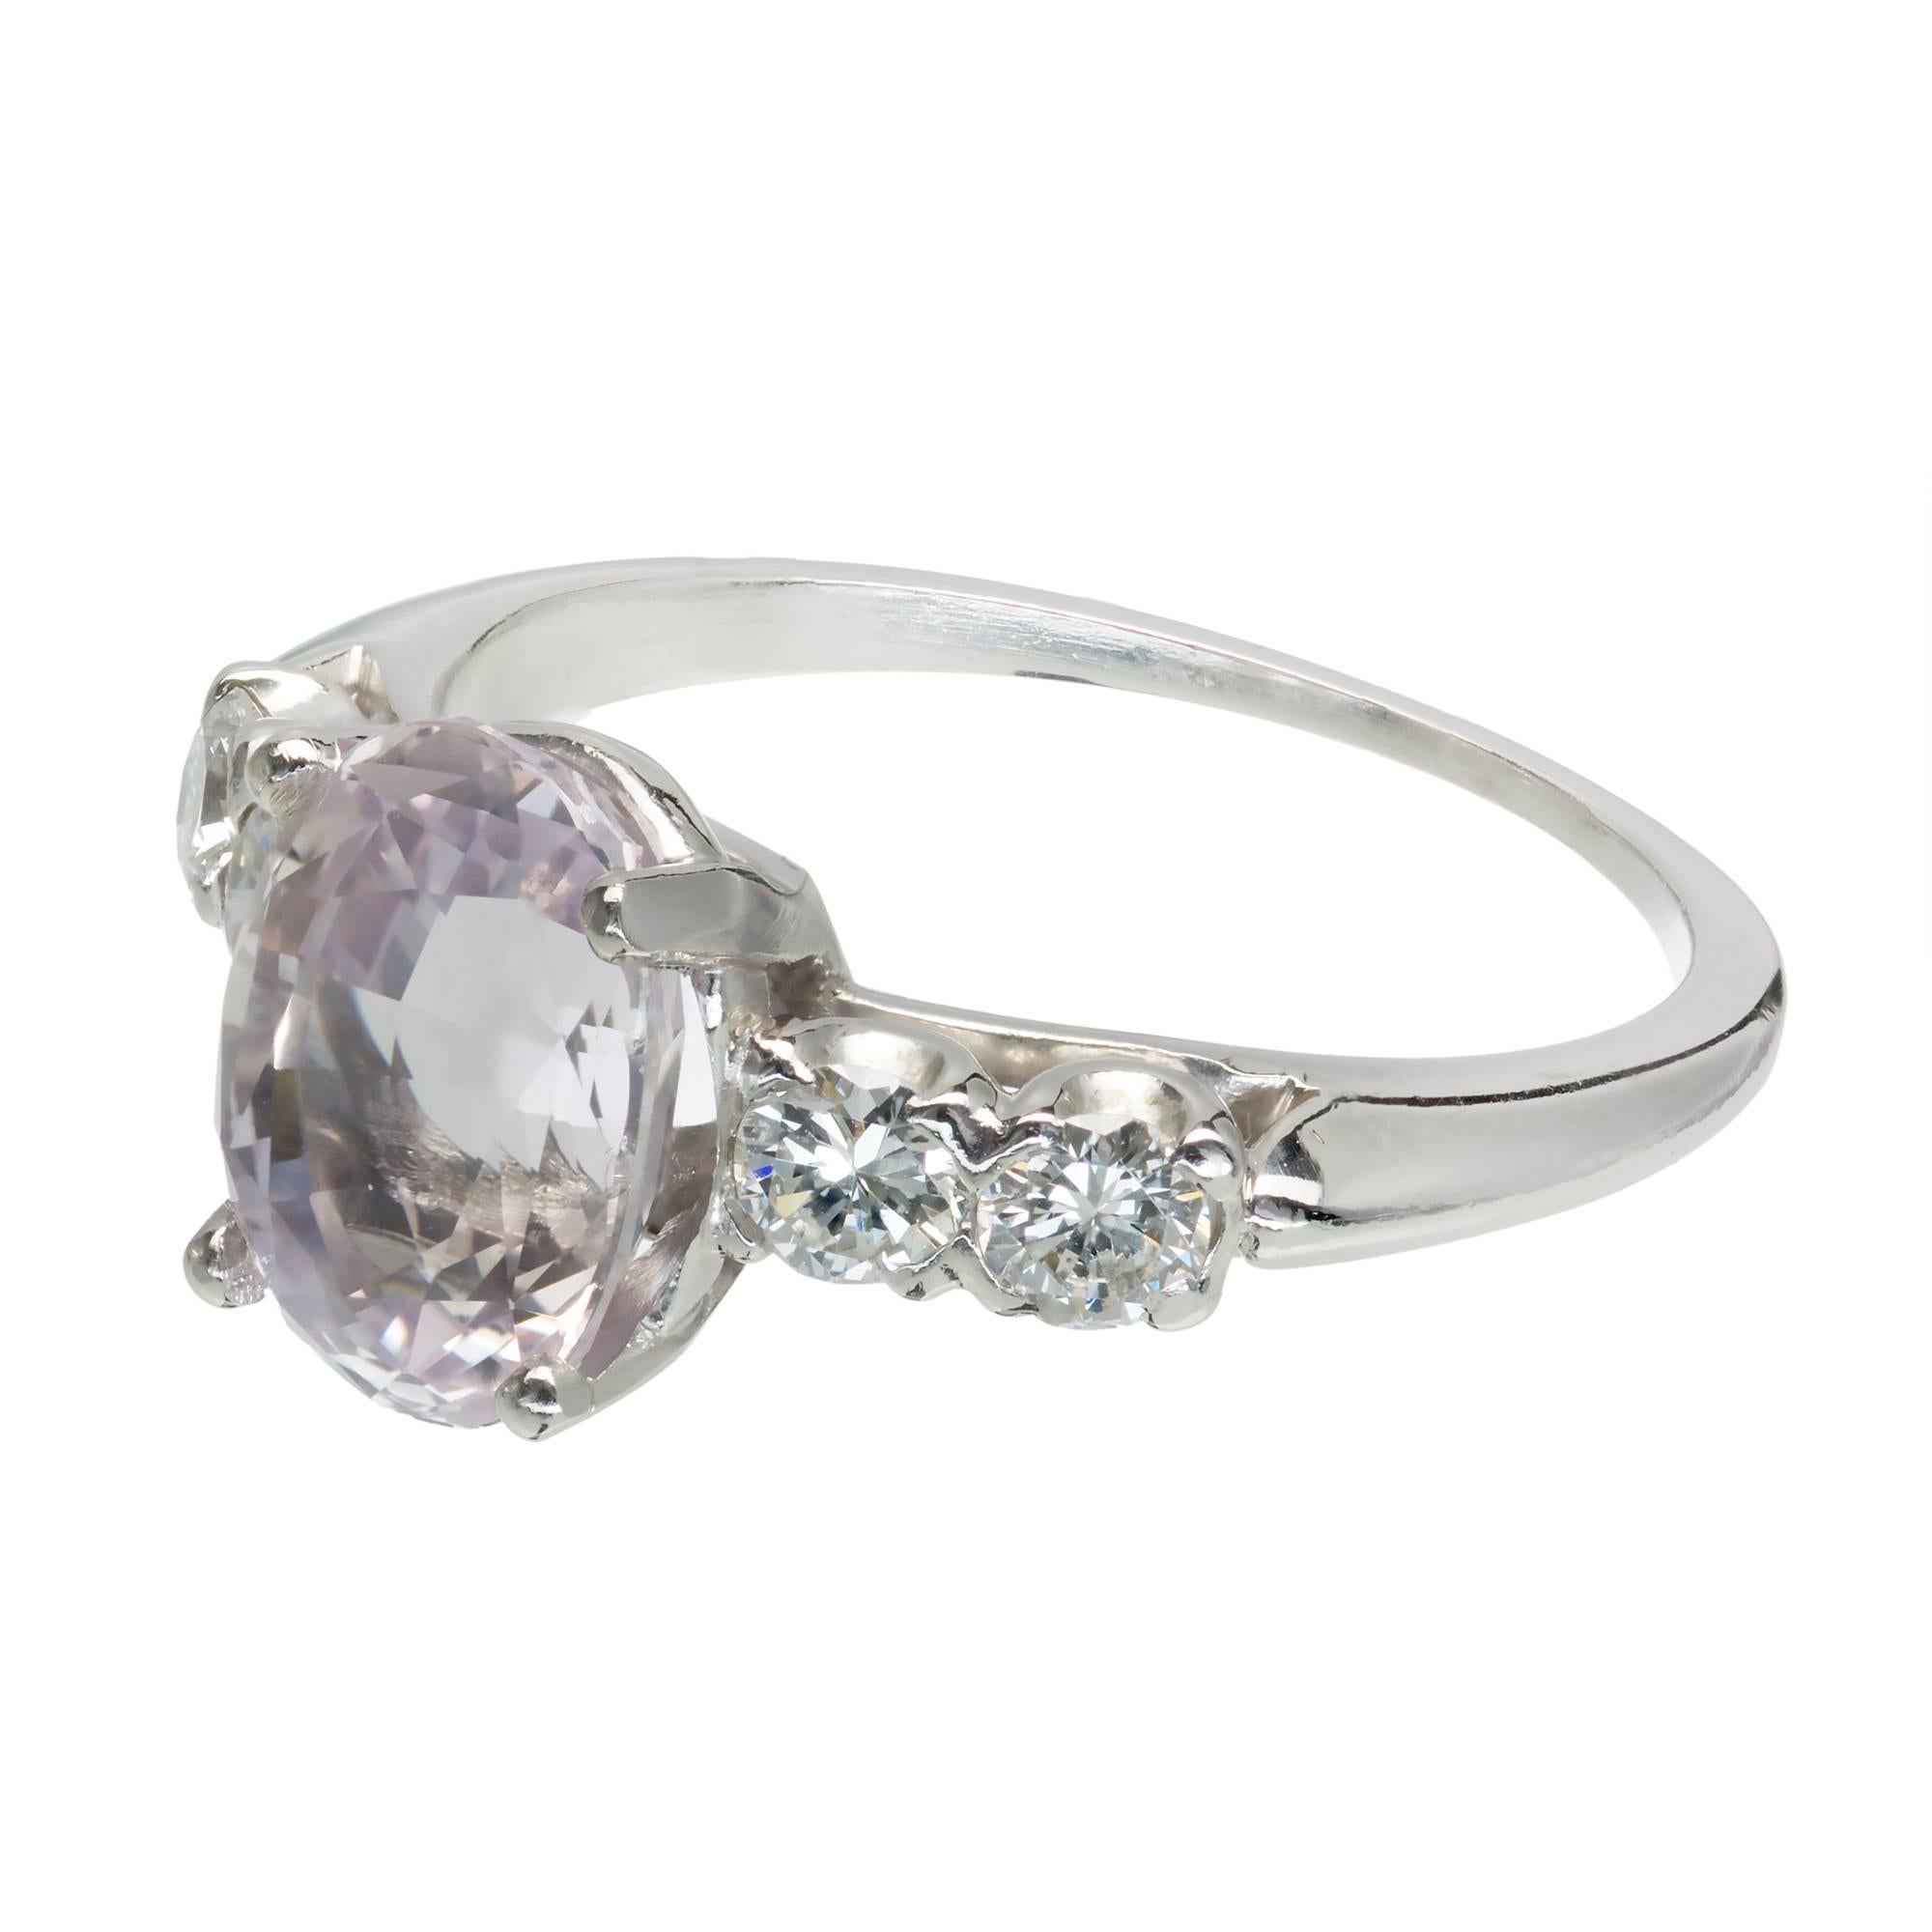 Natural no heat GIA certified oval soft light pink Sapphire engagement ring circa 1940 -1950 with fine white full cut side Diamonds in a Platinum setting.

1 oval light pink sapphire, approx. total weight 3.39cts, MI, GIA certificate # 2175101453
4